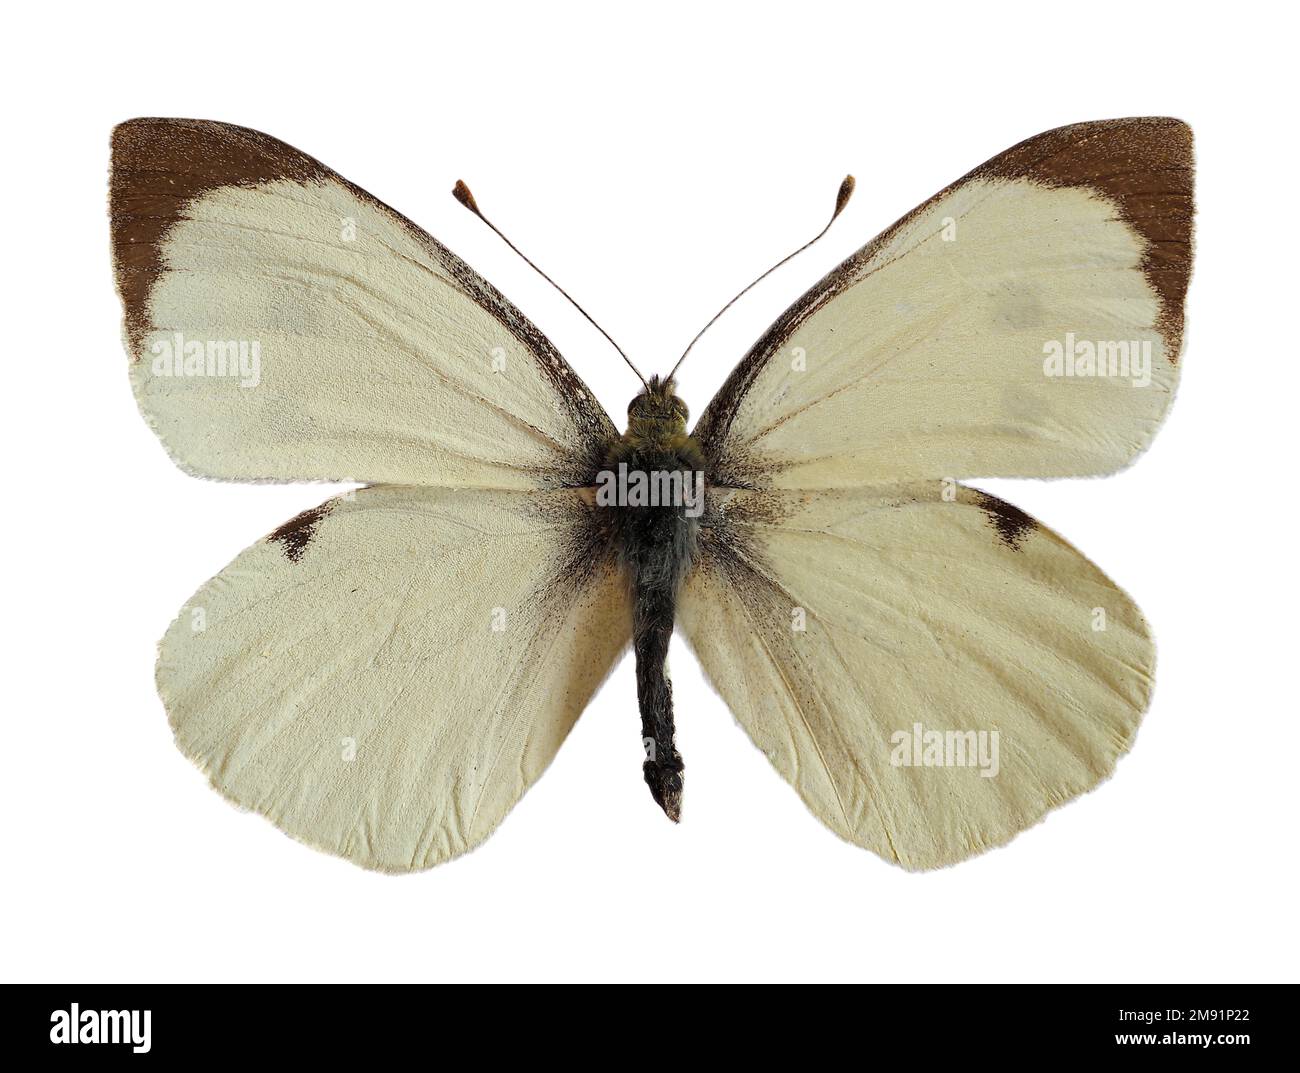 Male large white butterfly, also called Cabbage Butterfly or Cabbage White (Pieris brassicae), open wings isolated on white background Stock Photo